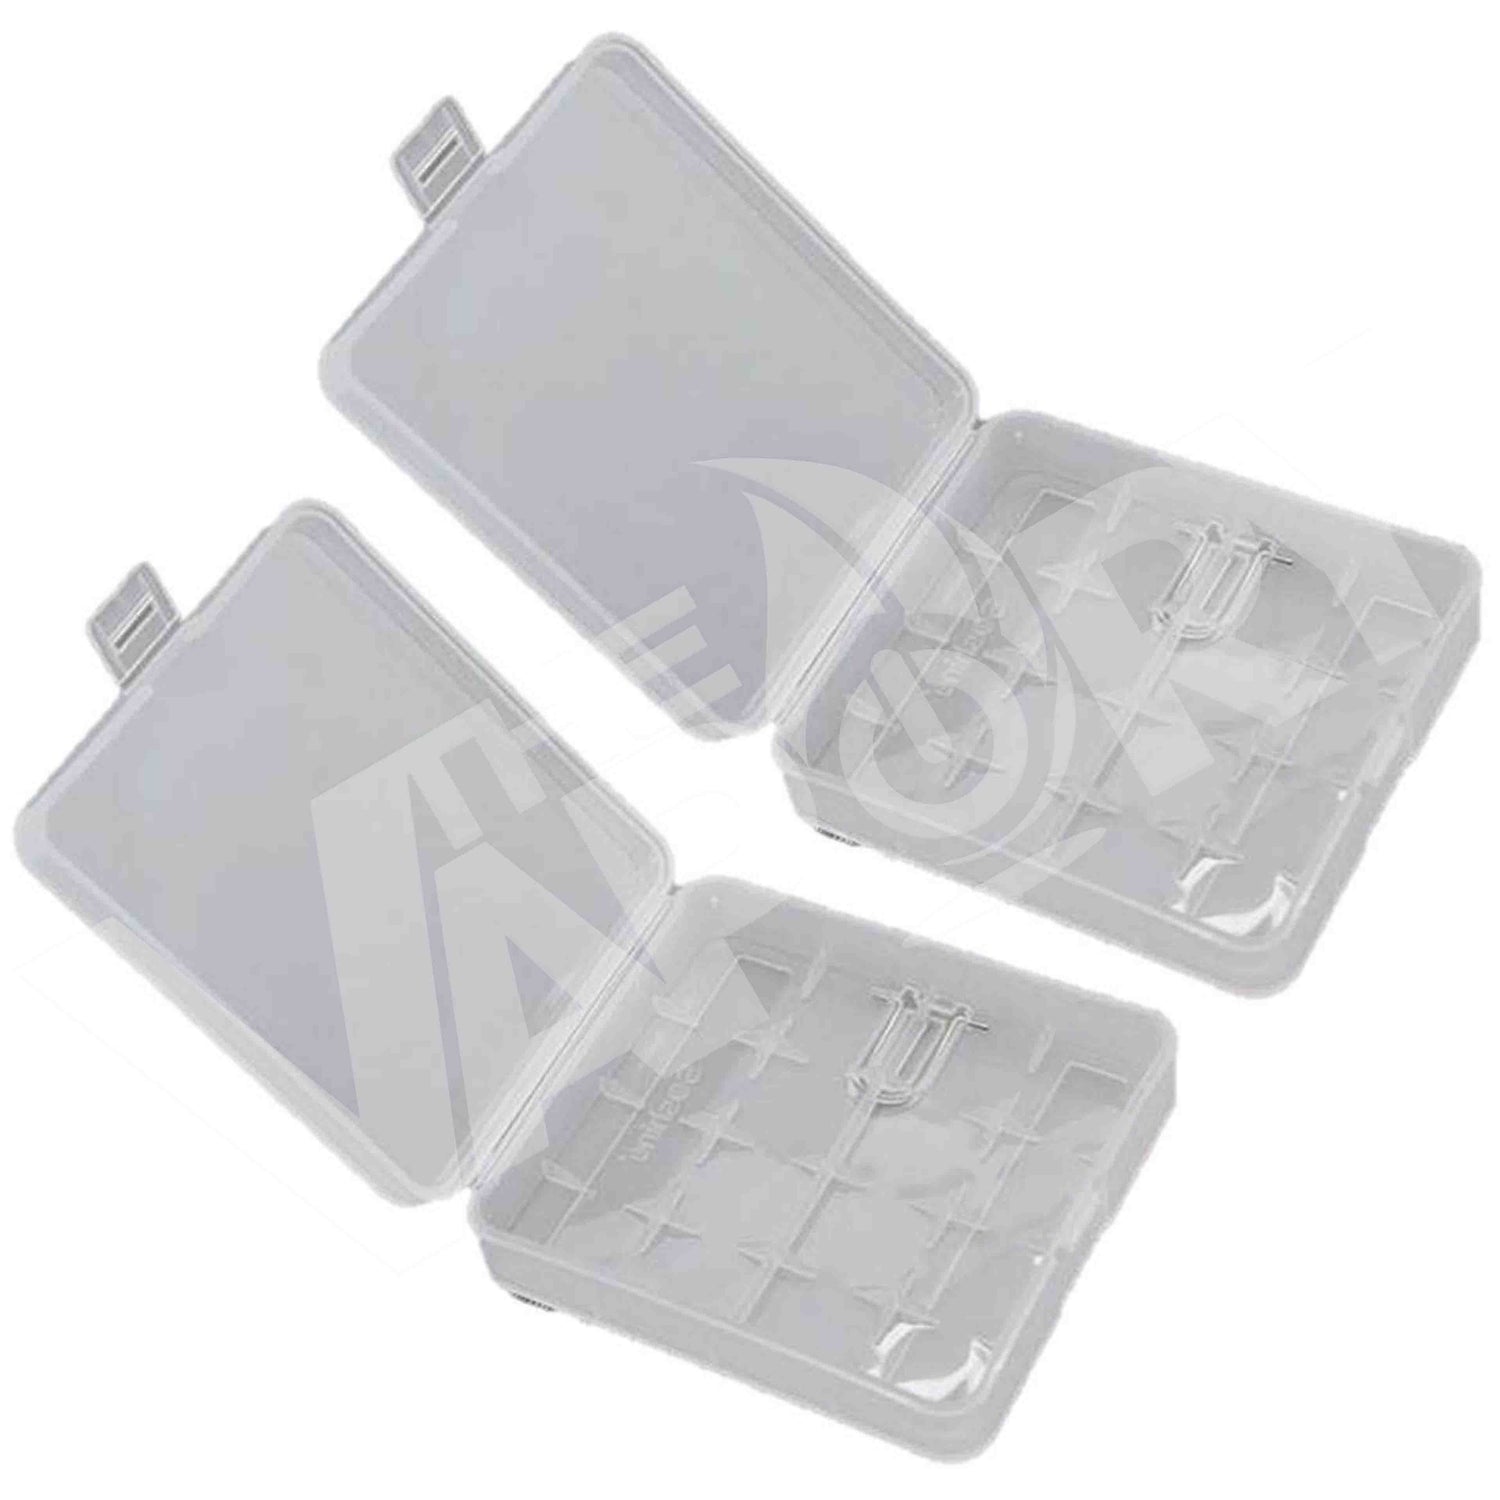 BATTERY CASE ACCESSORIES China 